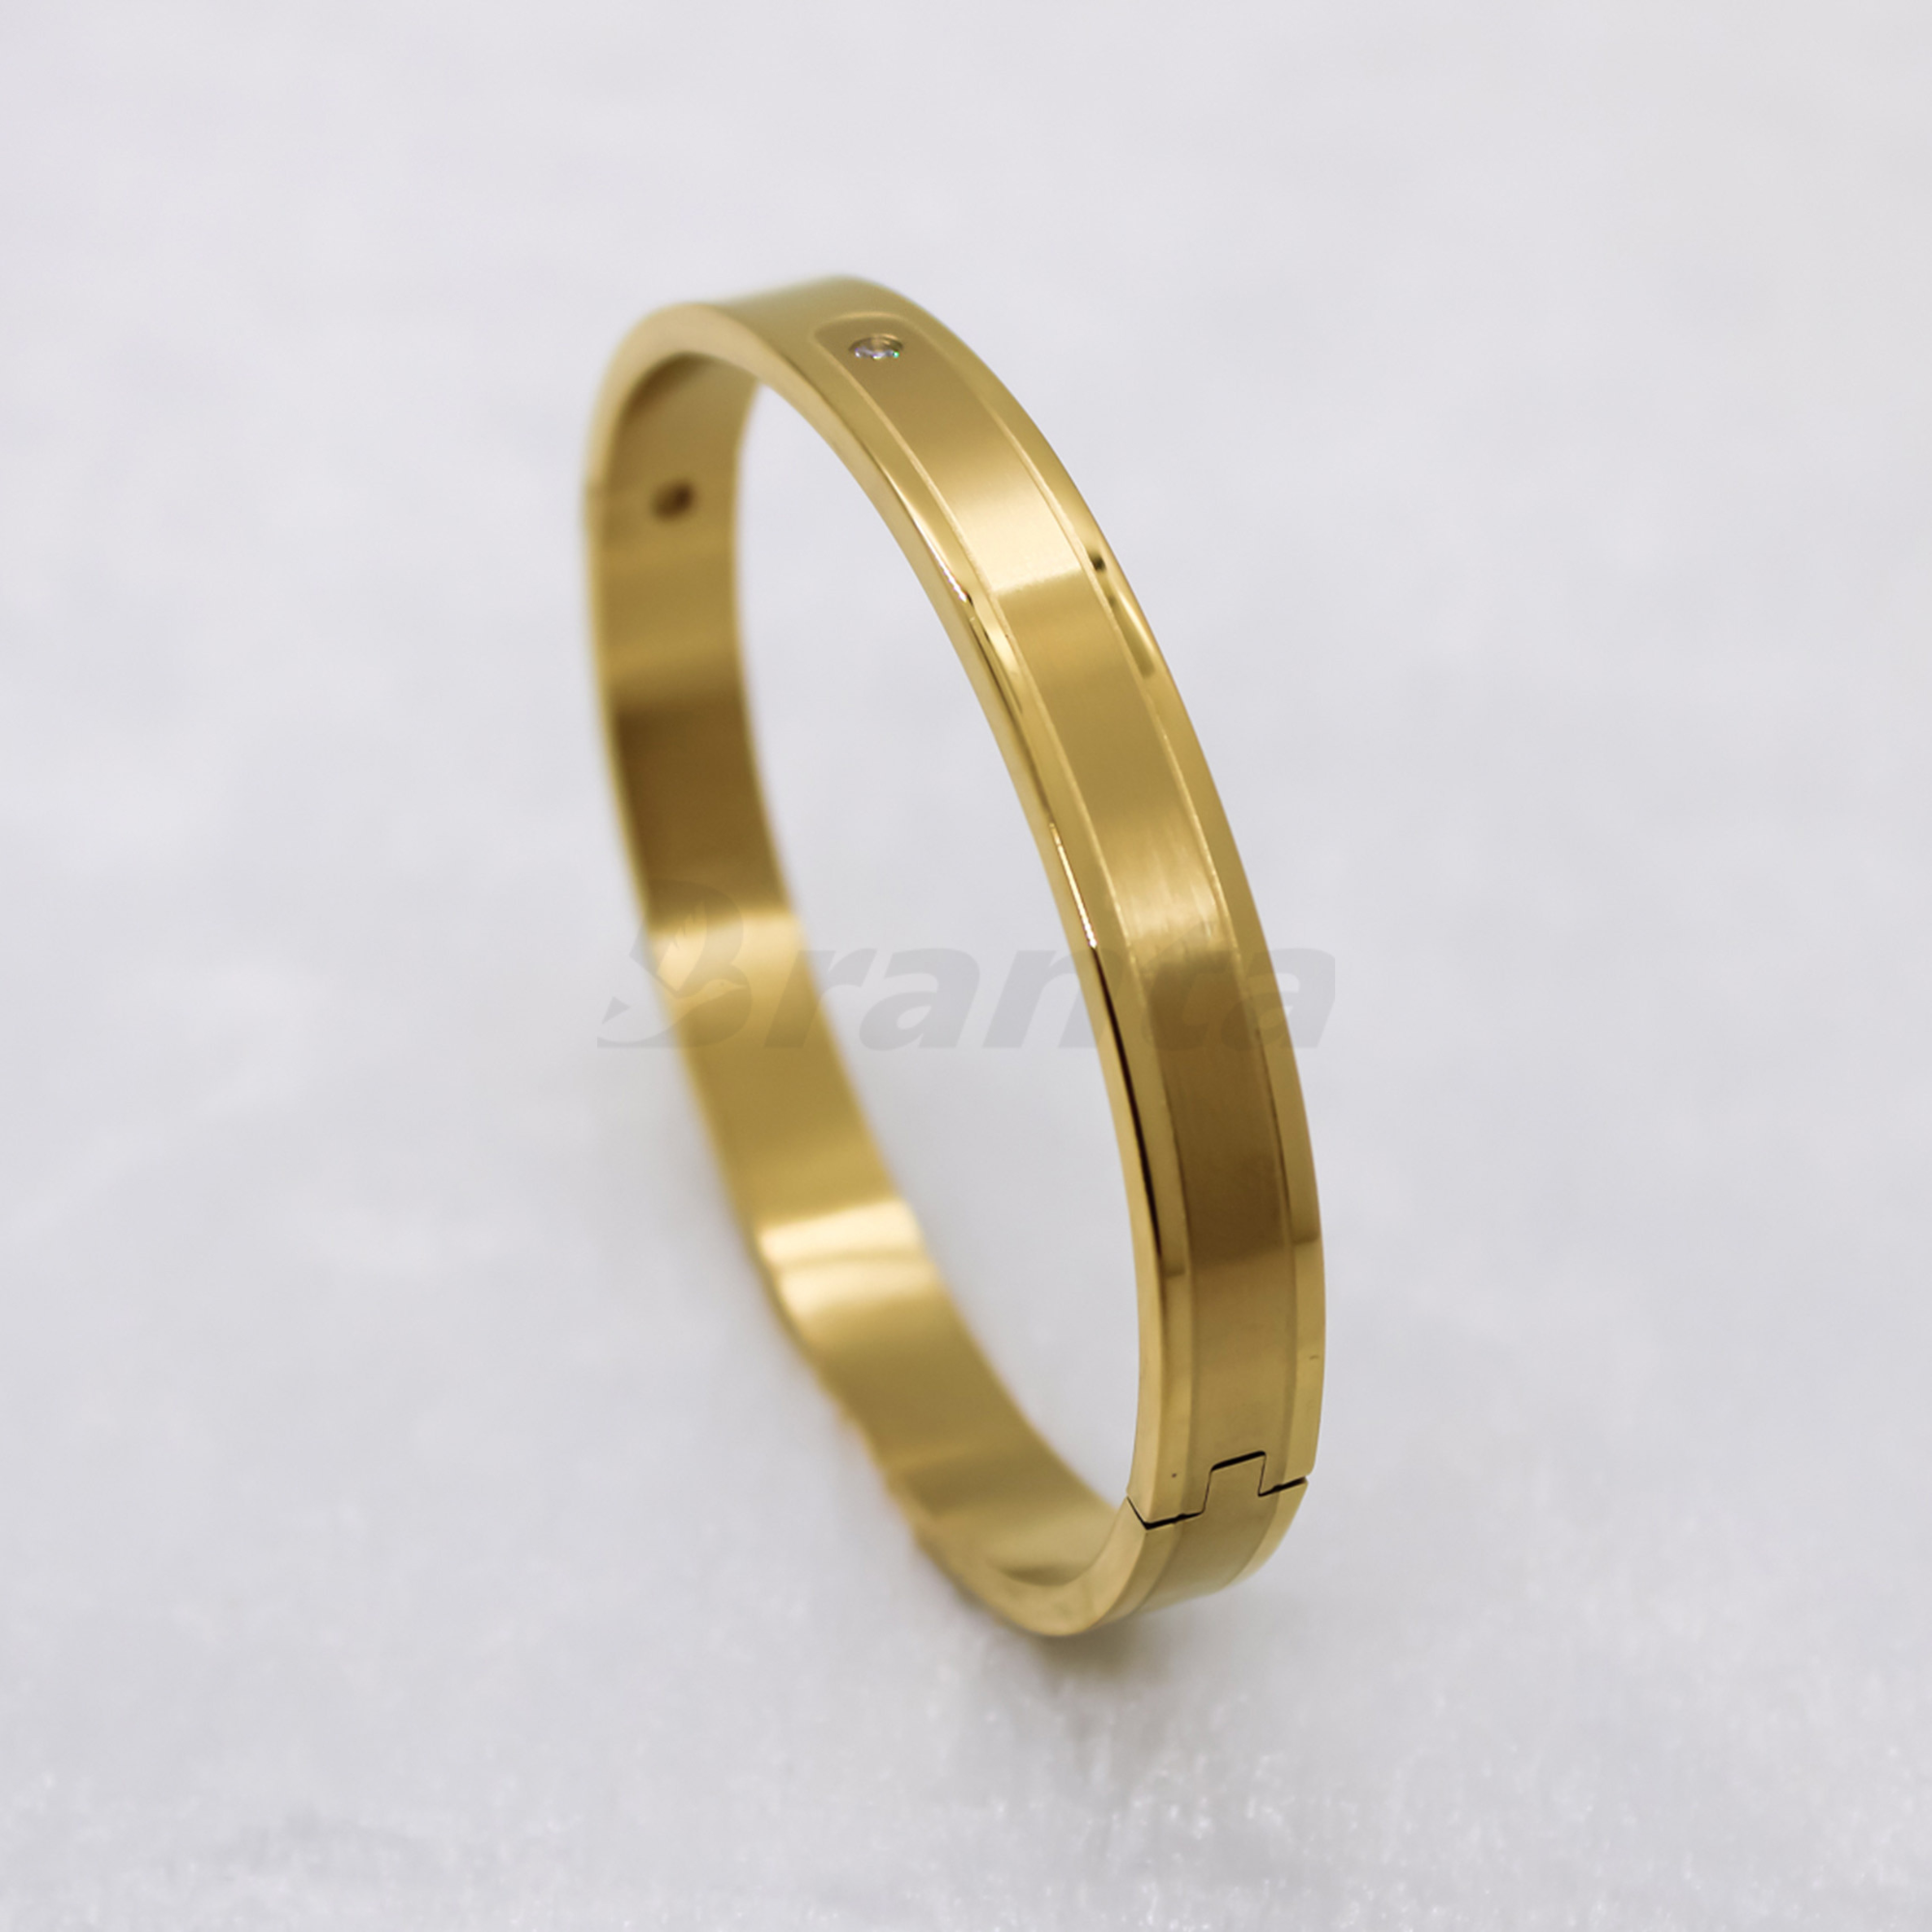 Buy latest Gold Bracelet designs for men and women| Lalithaa Jewellery